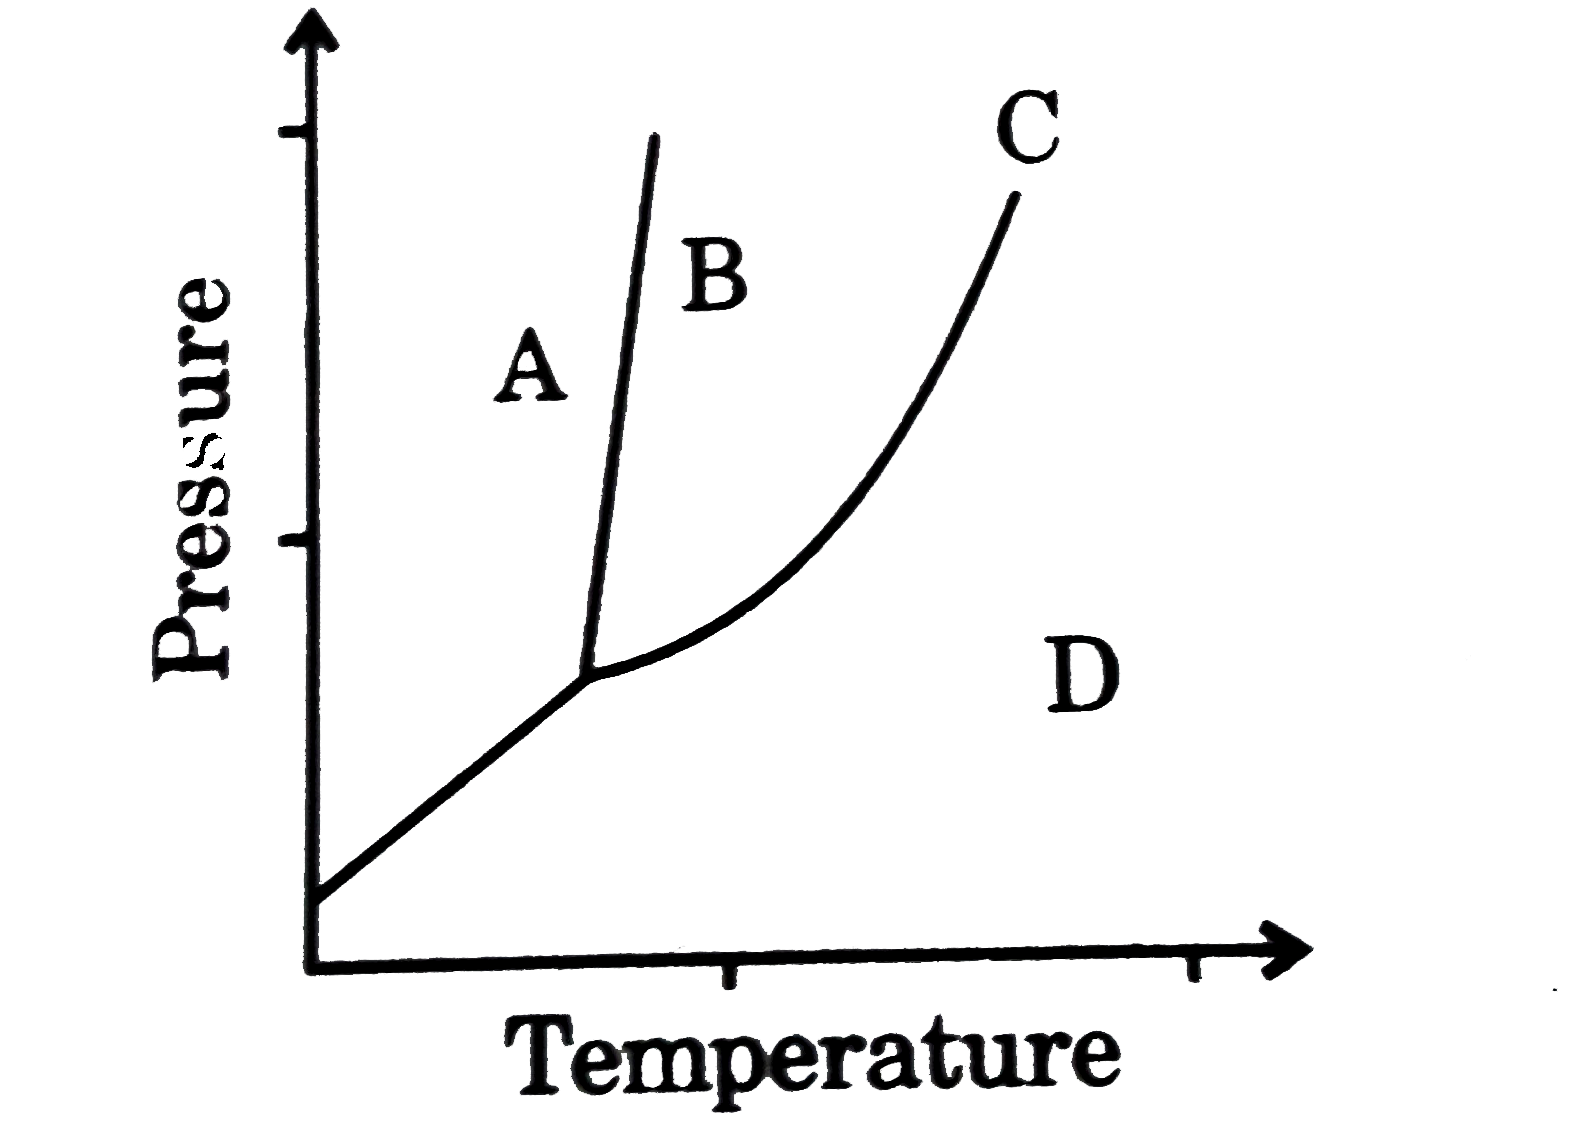 Supercritical carbon dioxide exists at which point on the accompanying phase diagram ?